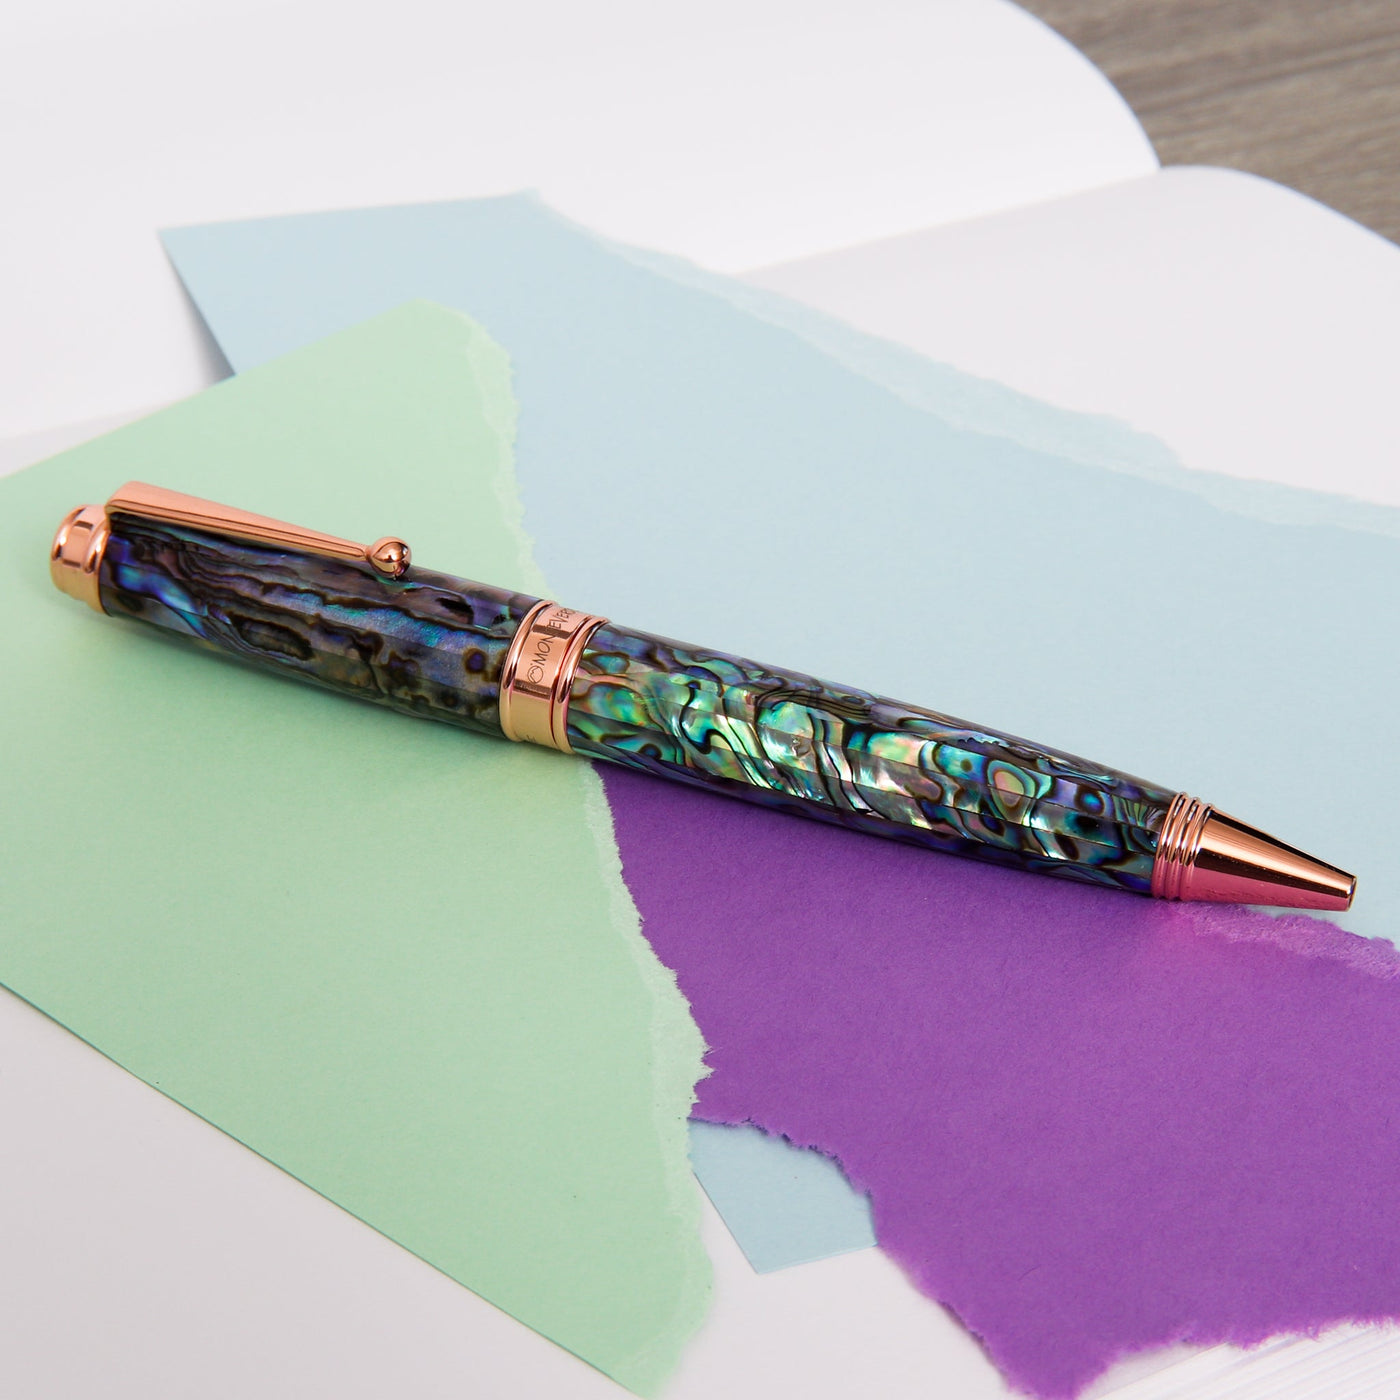 Monteverde-Invincia-Deluxe-Abalone-&-Rose-Gold-Ballpoint-Pen-Barrel-Made-Of-New-Zealand-Iridescent-Nacre-Layer-Of-Abalone-Shell